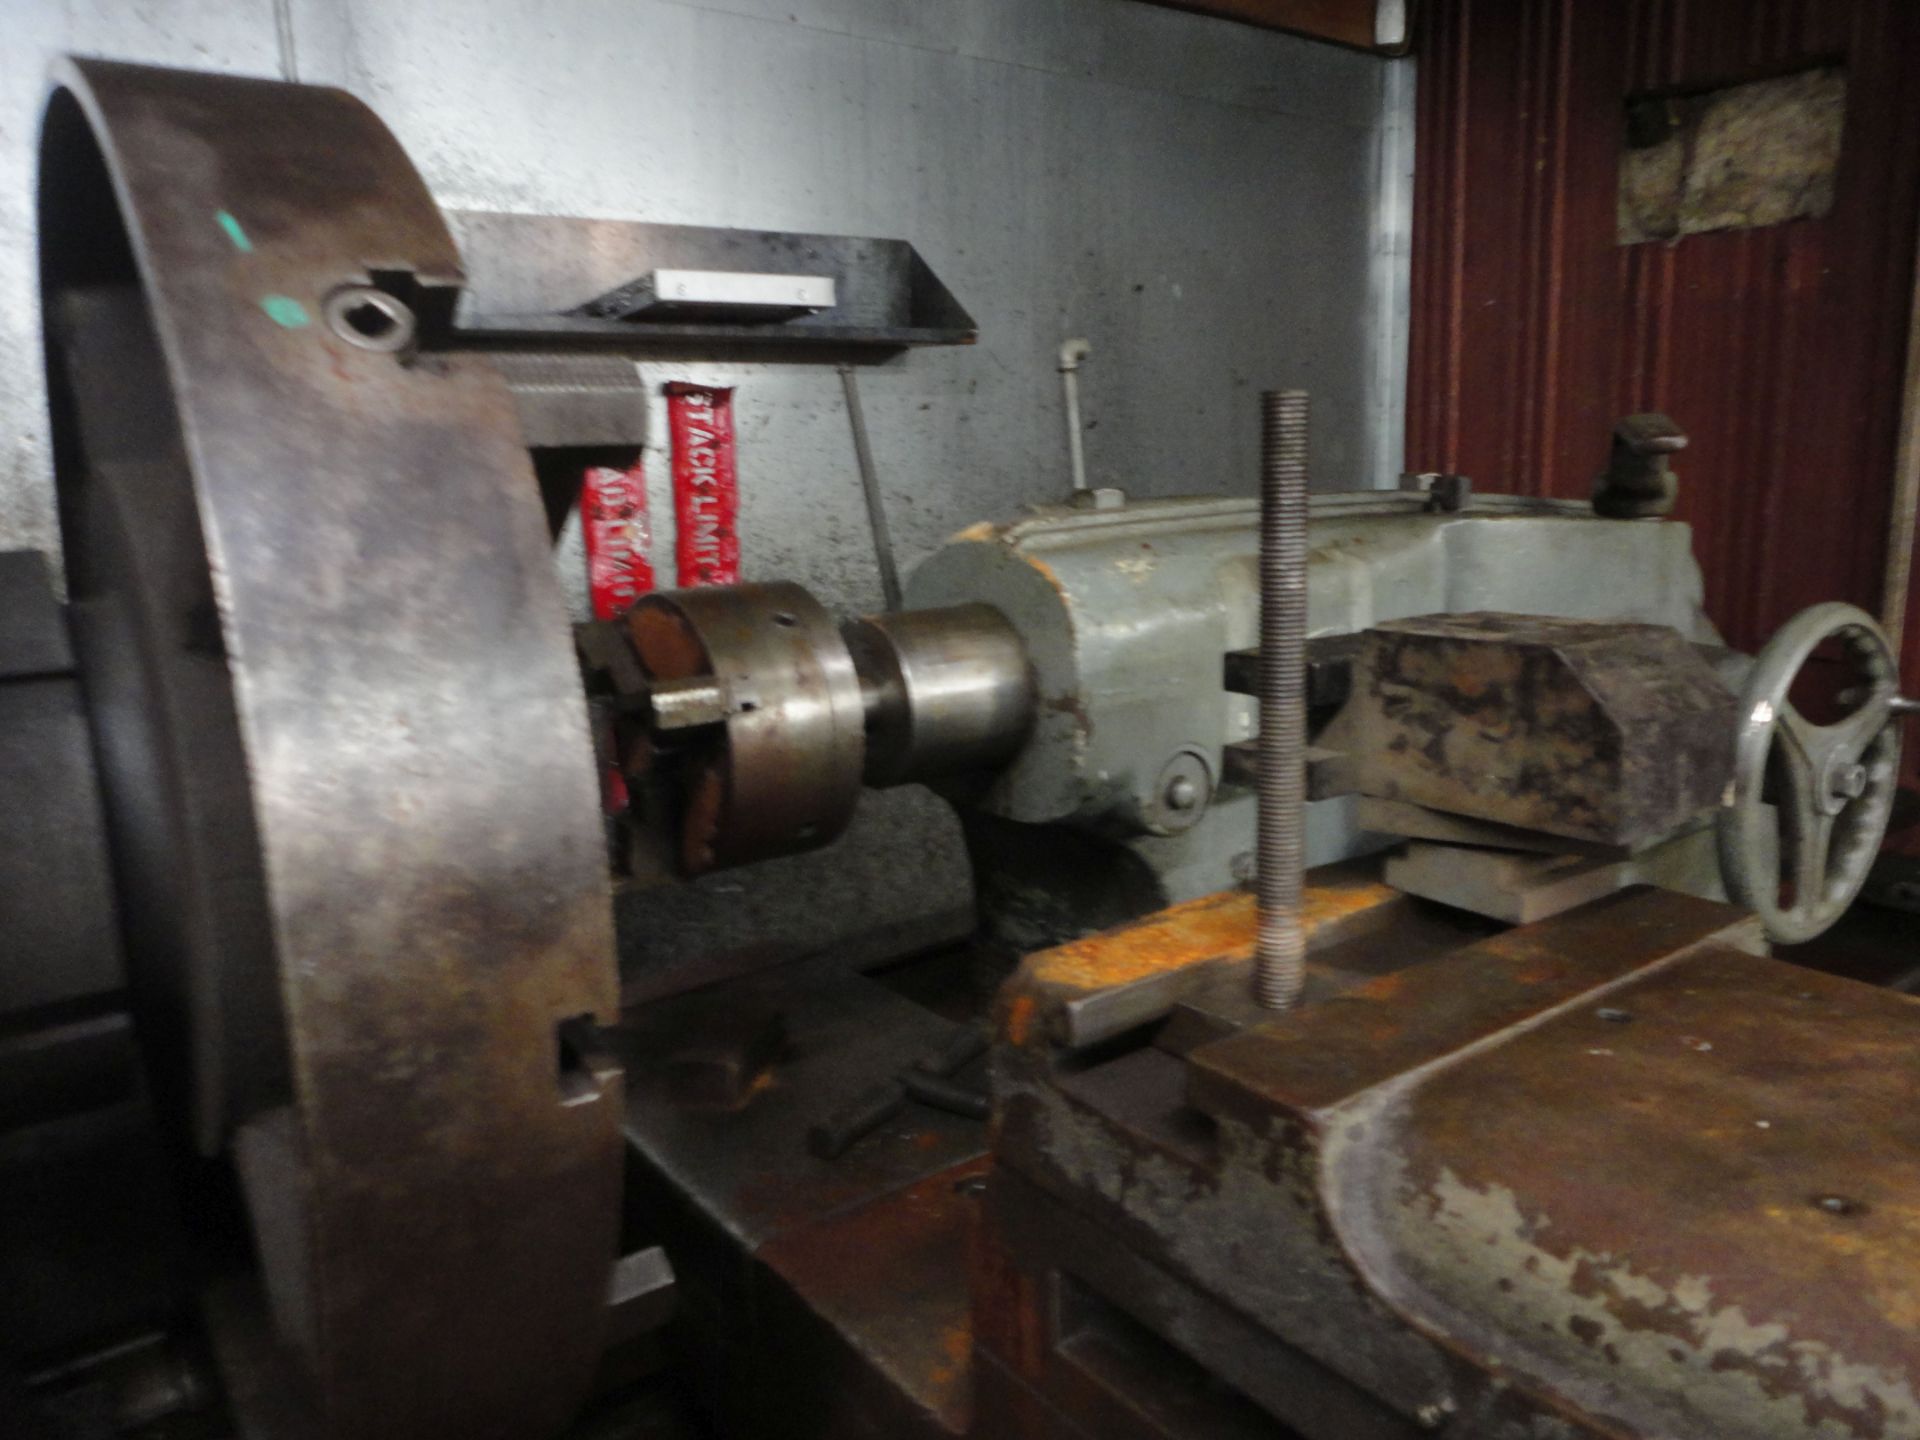 46" X 84" AMERICAN PACEMAKER ENGINE LATHE; S/N N/A, 46" SWING OVER BED, 30" SWING OVER CROSS - Image 4 of 10